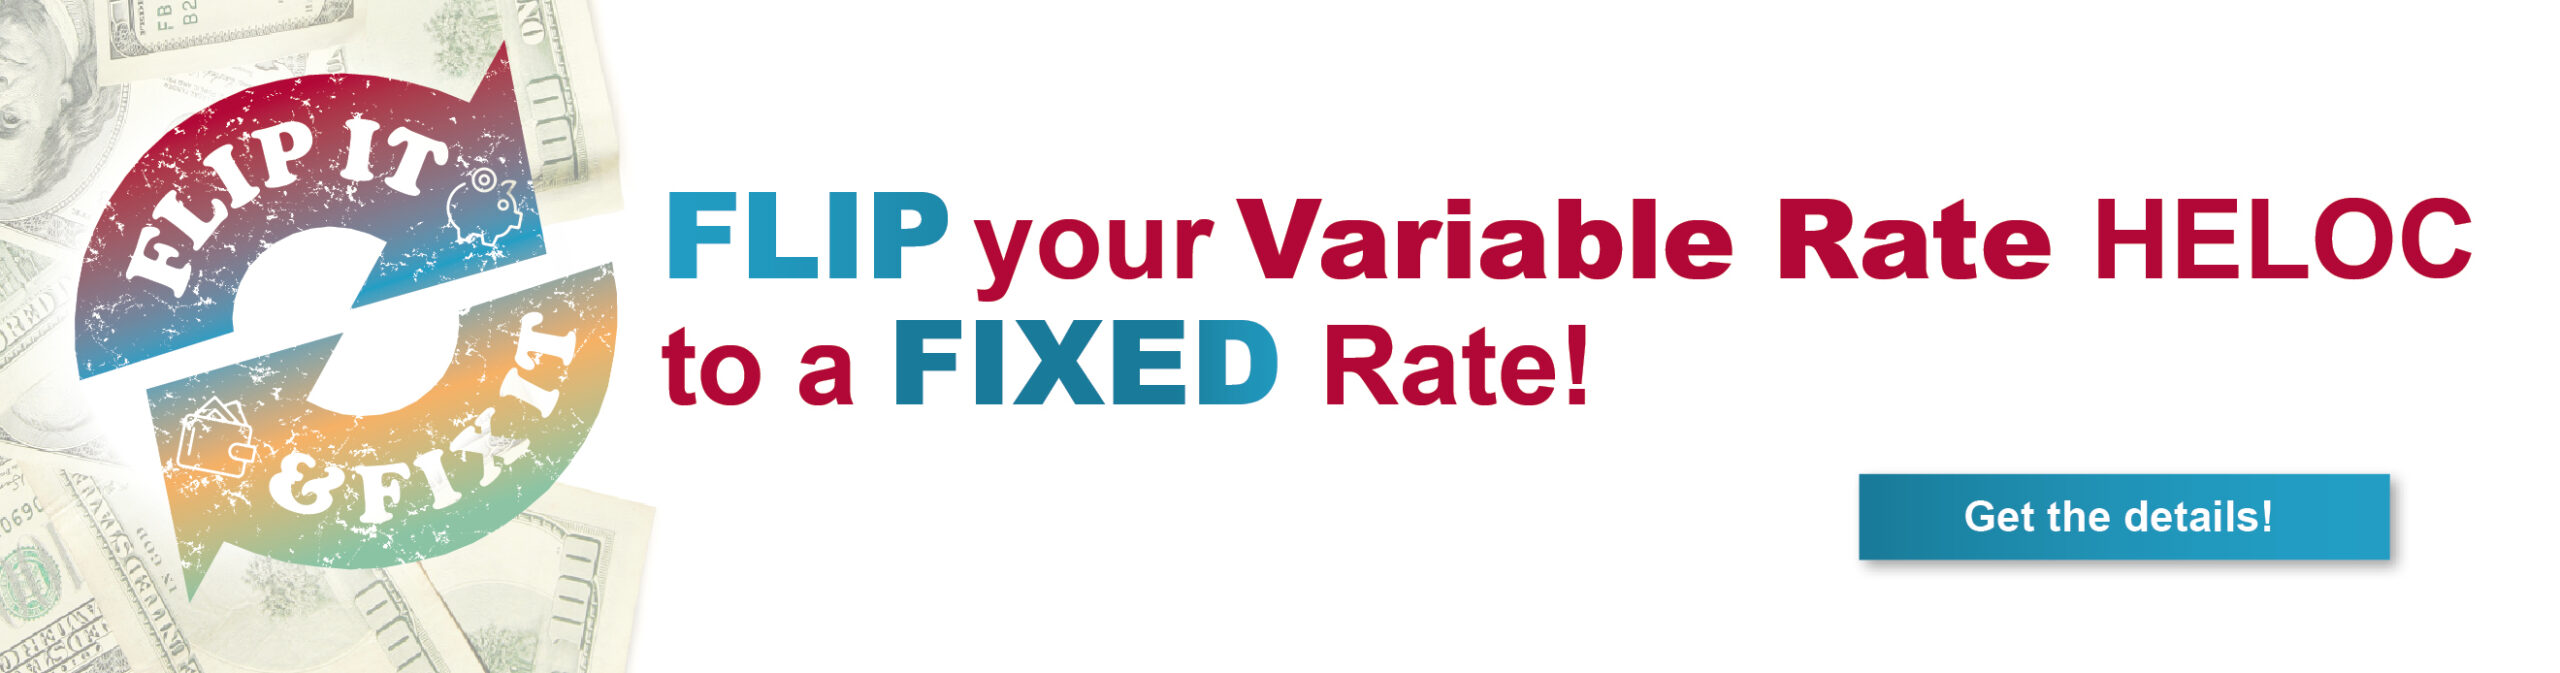 Flip your Variable Rate HELOC to a Fixed Rate